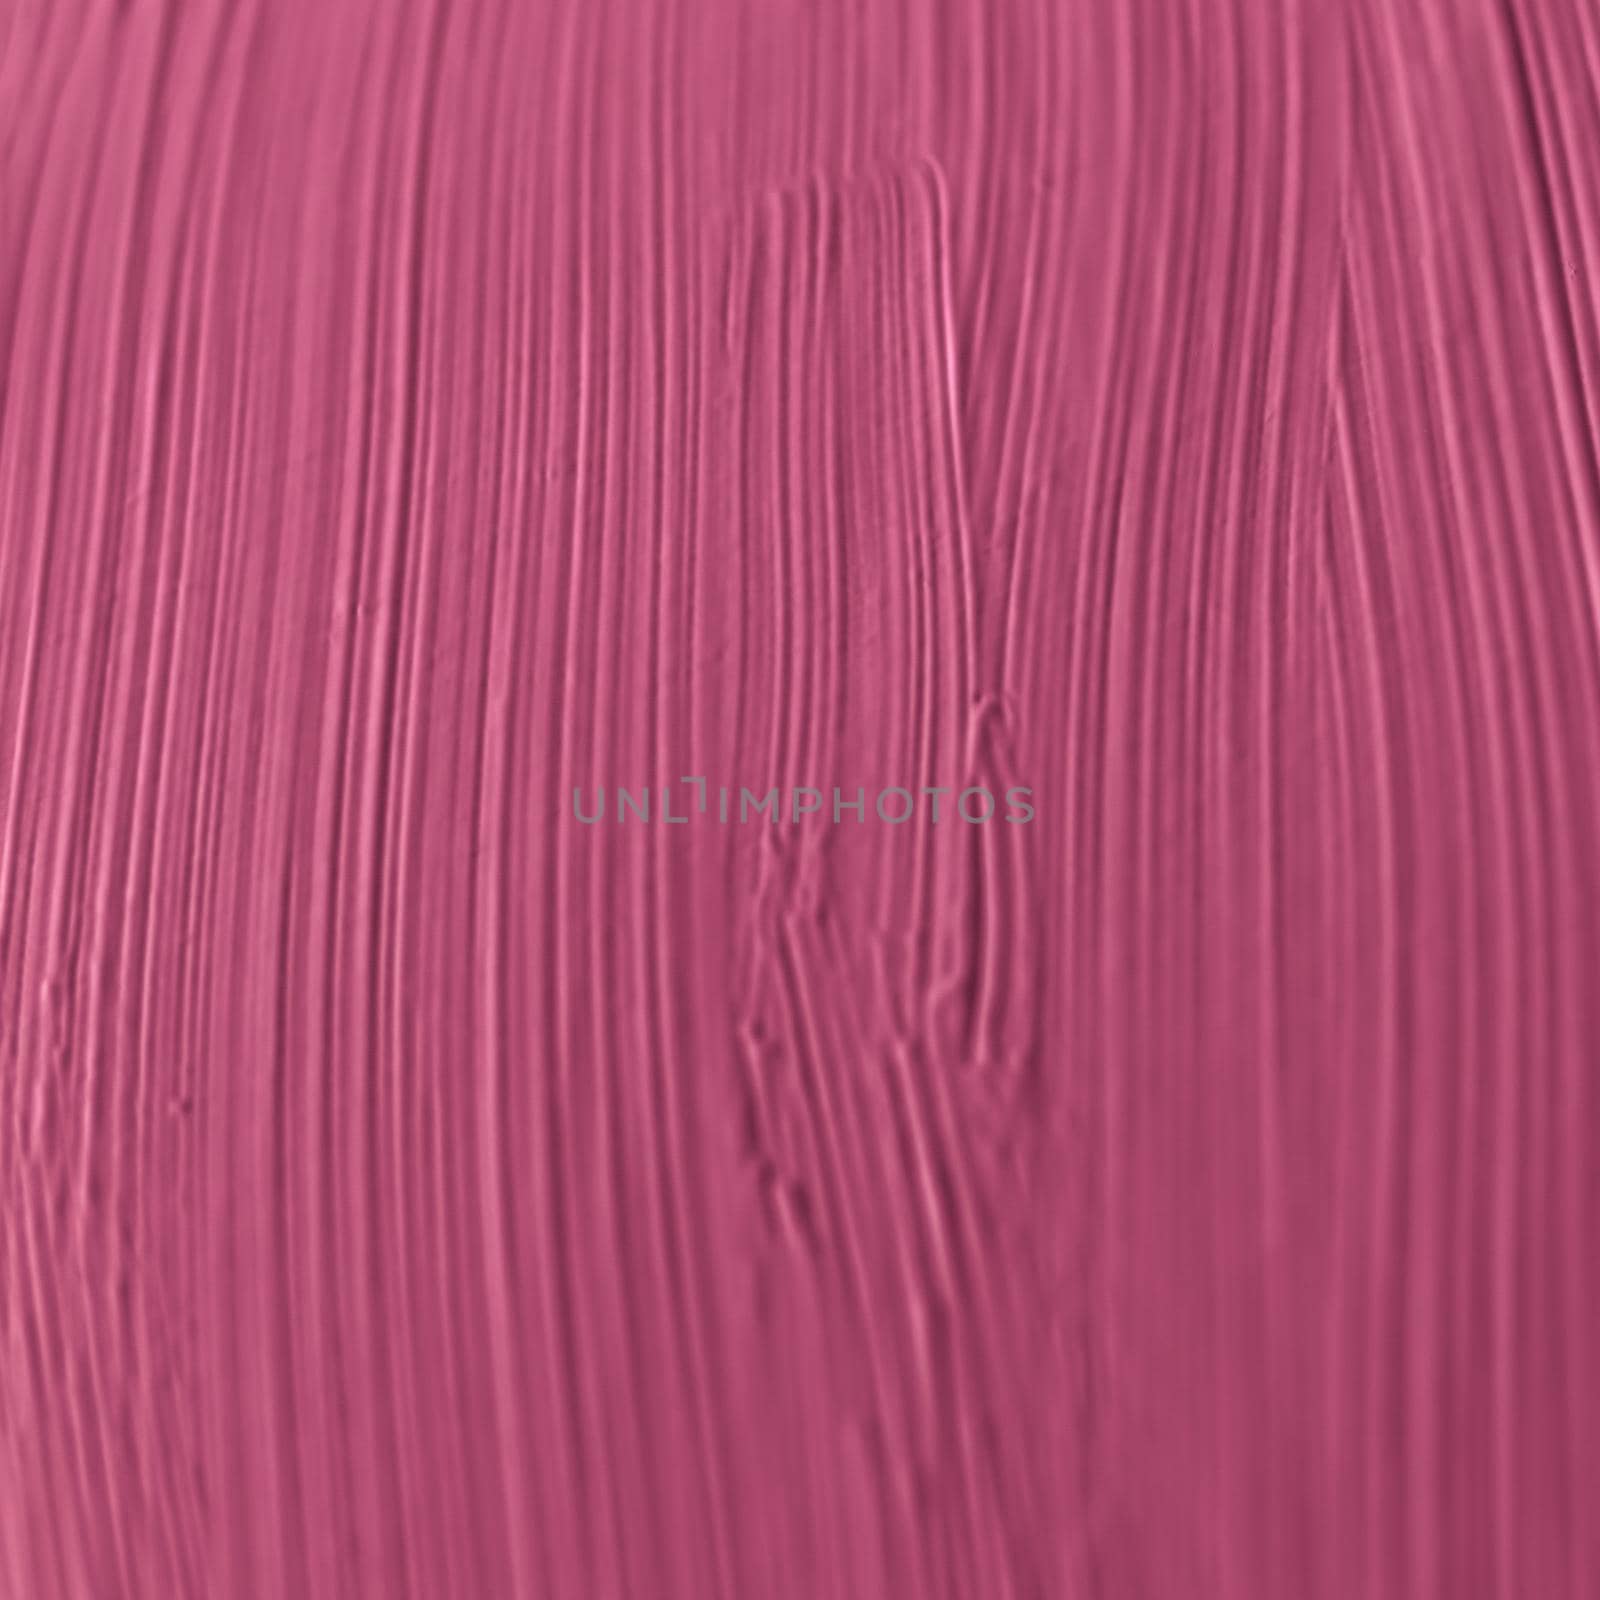 Cosmetics abstract texture background, pink acrylic paint brush stroke, textured cream product as make-up backdrop for luxury beauty brand, holiday banner design by Anneleven